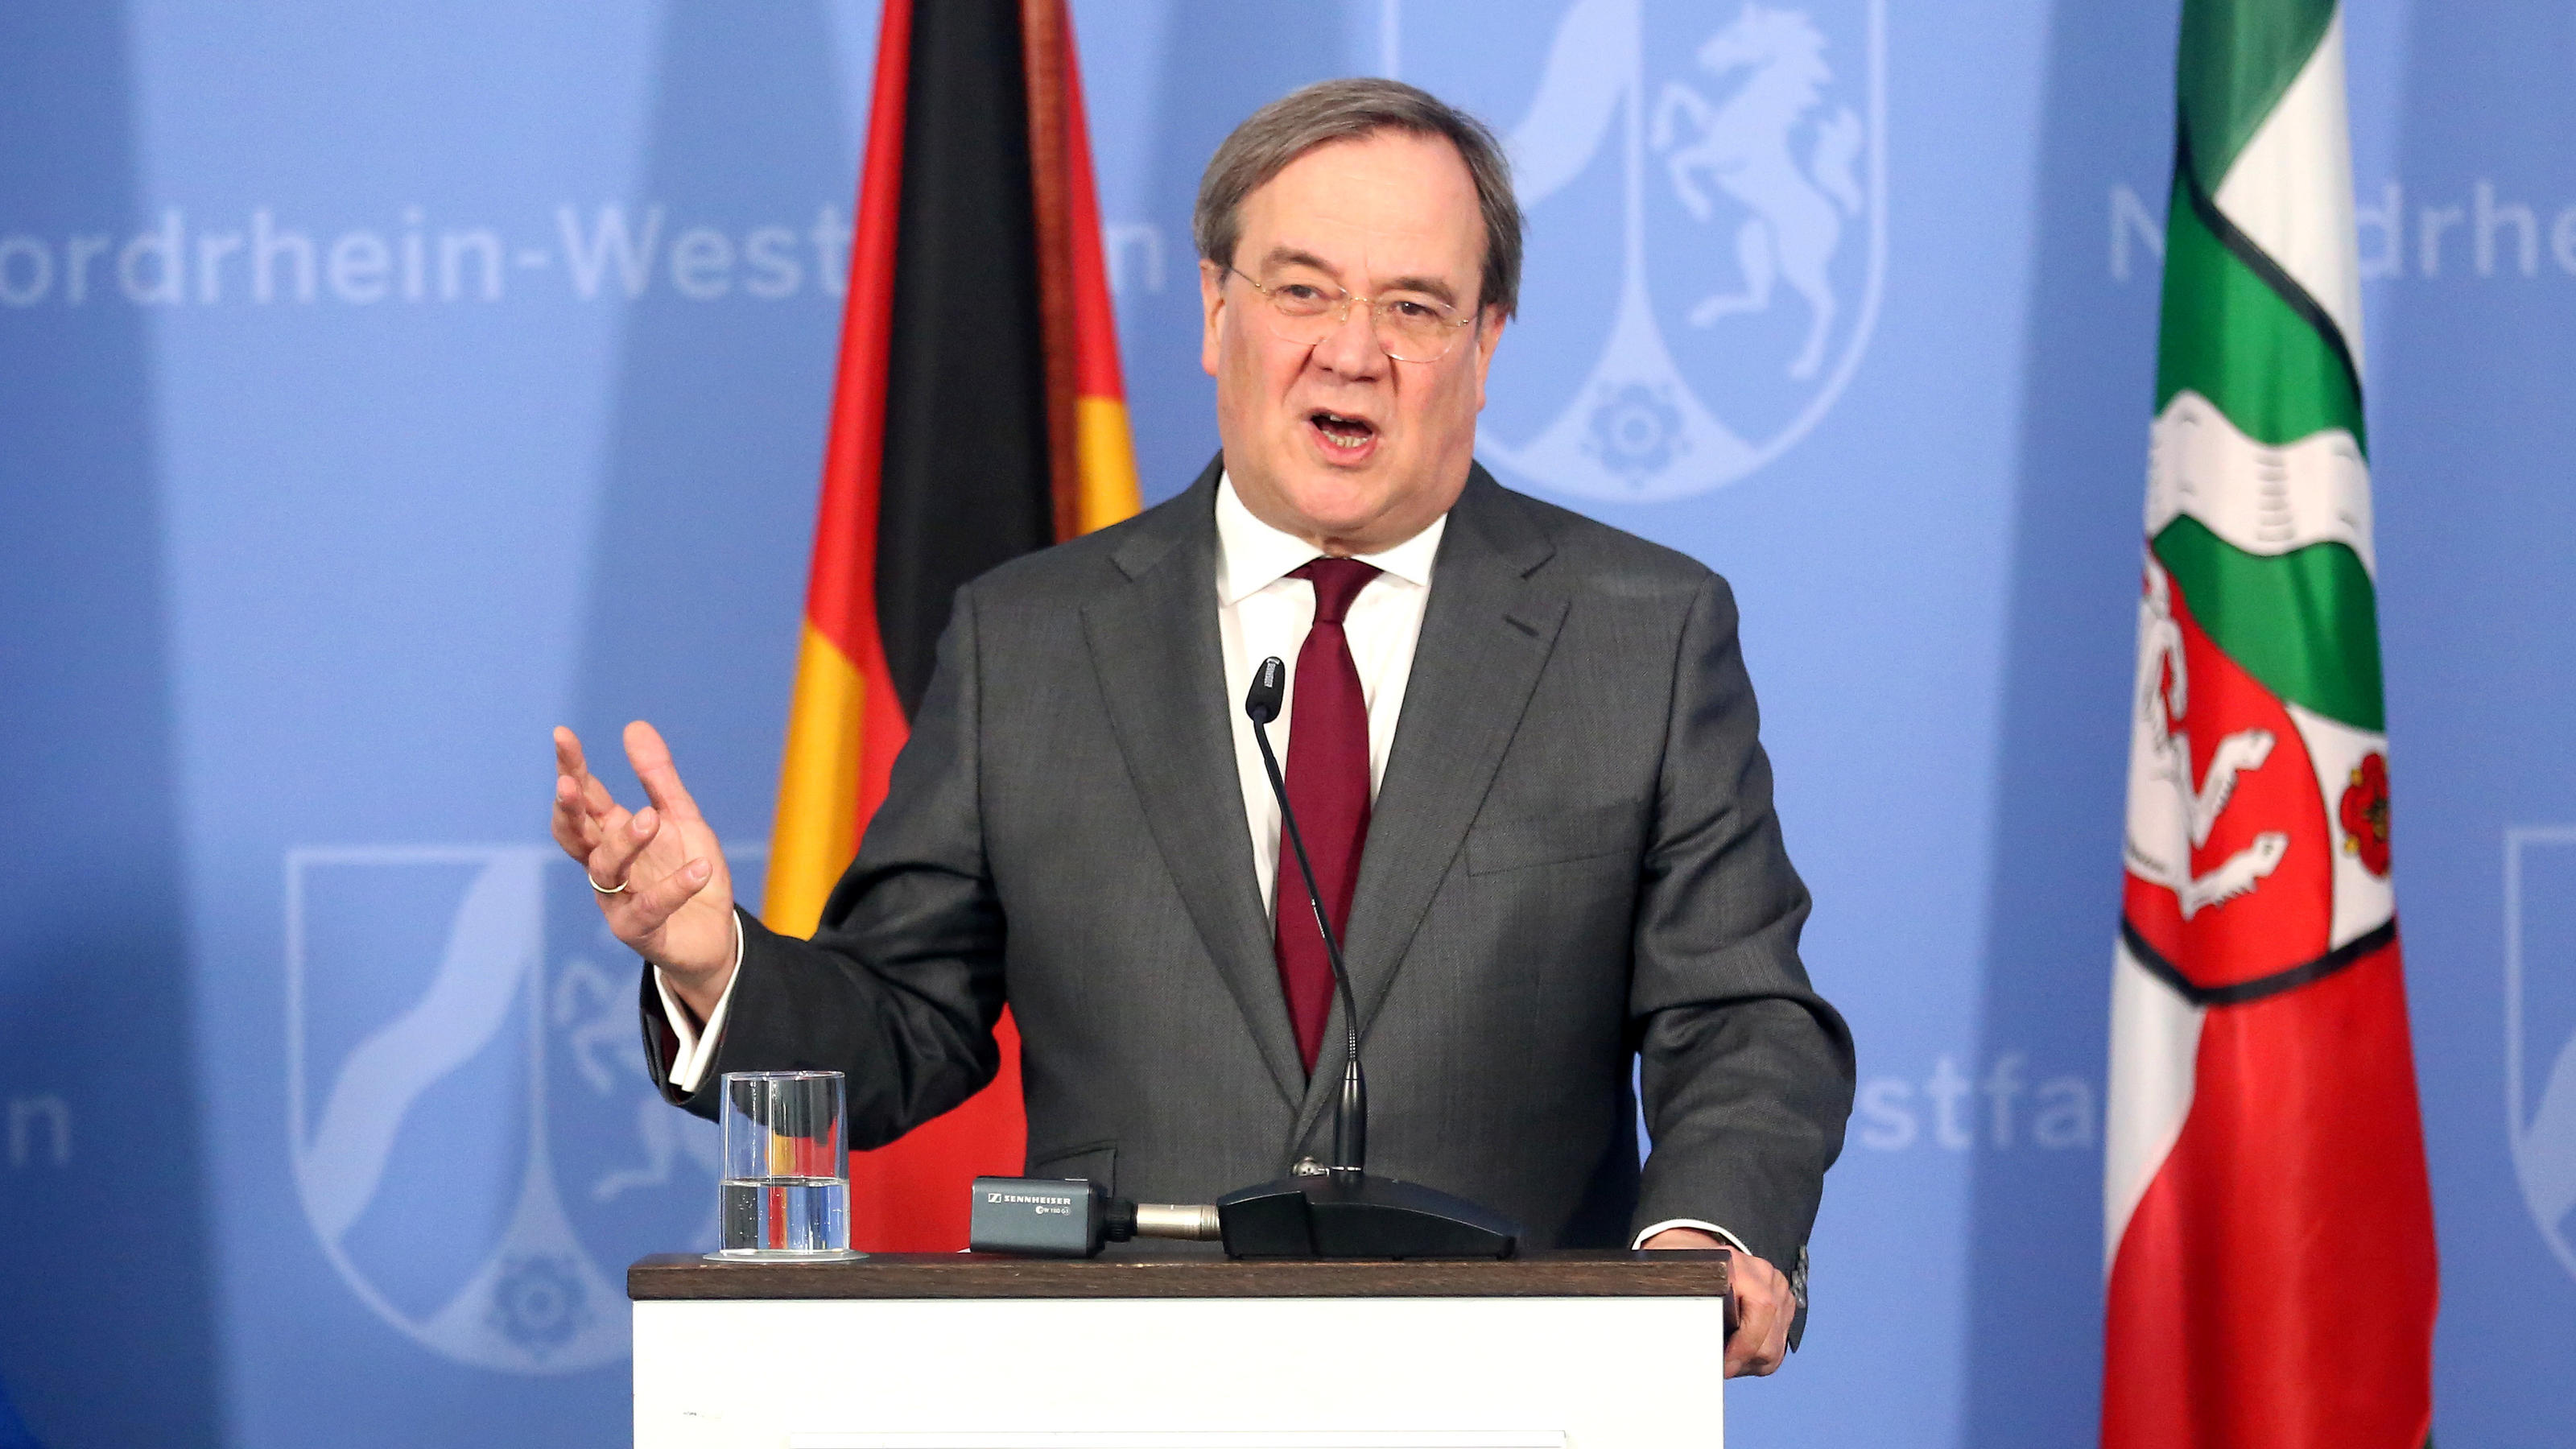 North Rhine Westphalia State Premier Armin Laschet makes a media statement on the spread of the new coronavirus disease (COVID-19) in Duesseldorf, Germany, March 22, 2020.   Roland Weihrauch/Pool via REUTERS